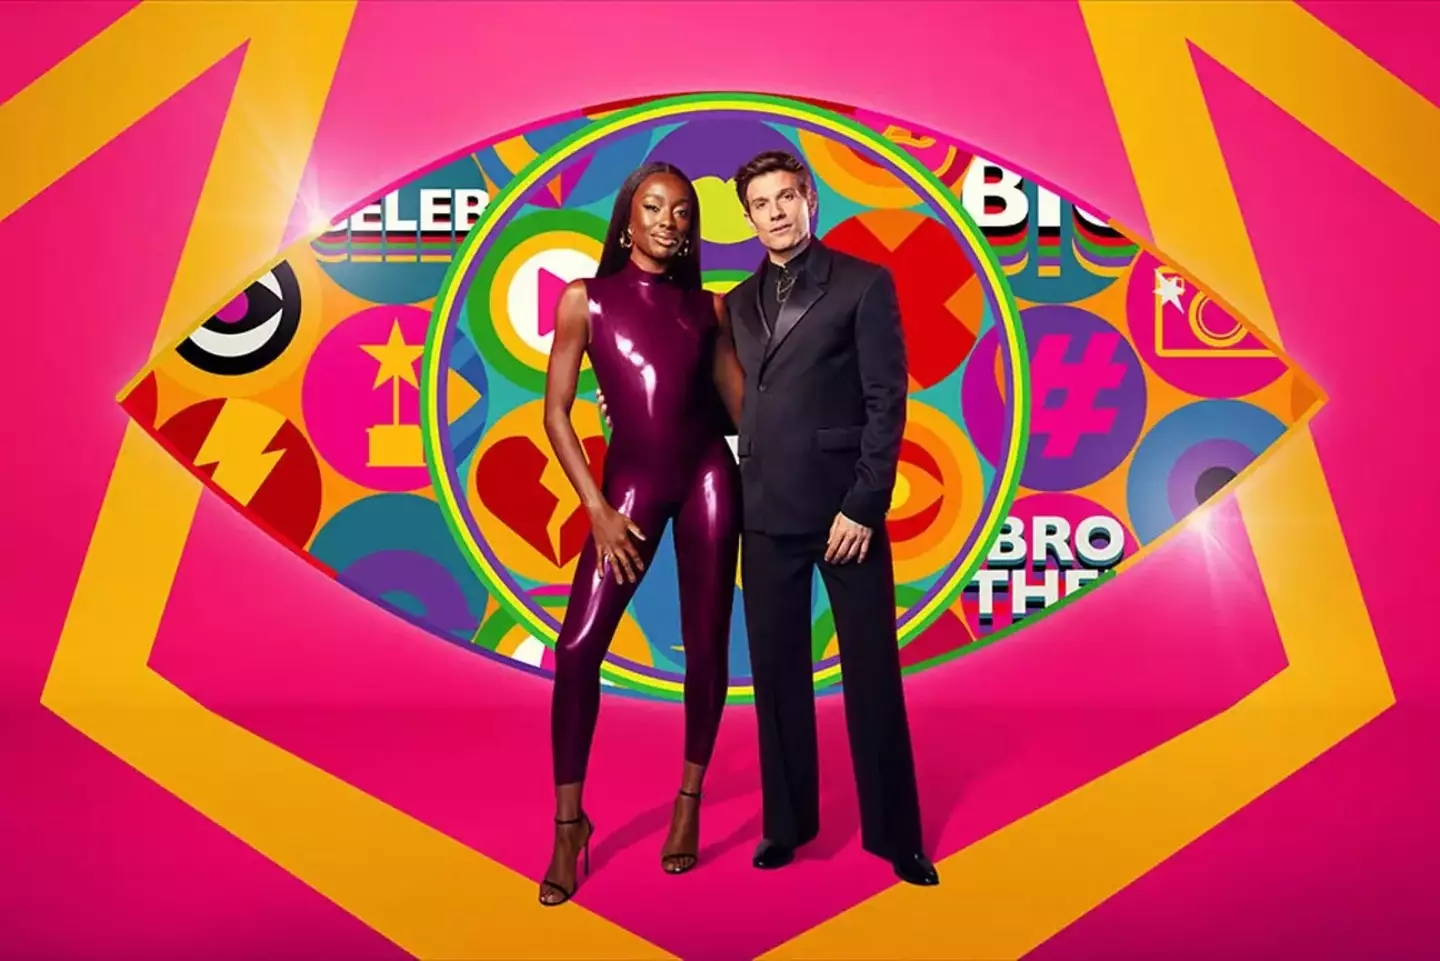 Celebrity Big Brother will be premiering on ITV1 and ITVX this evening (4 March).